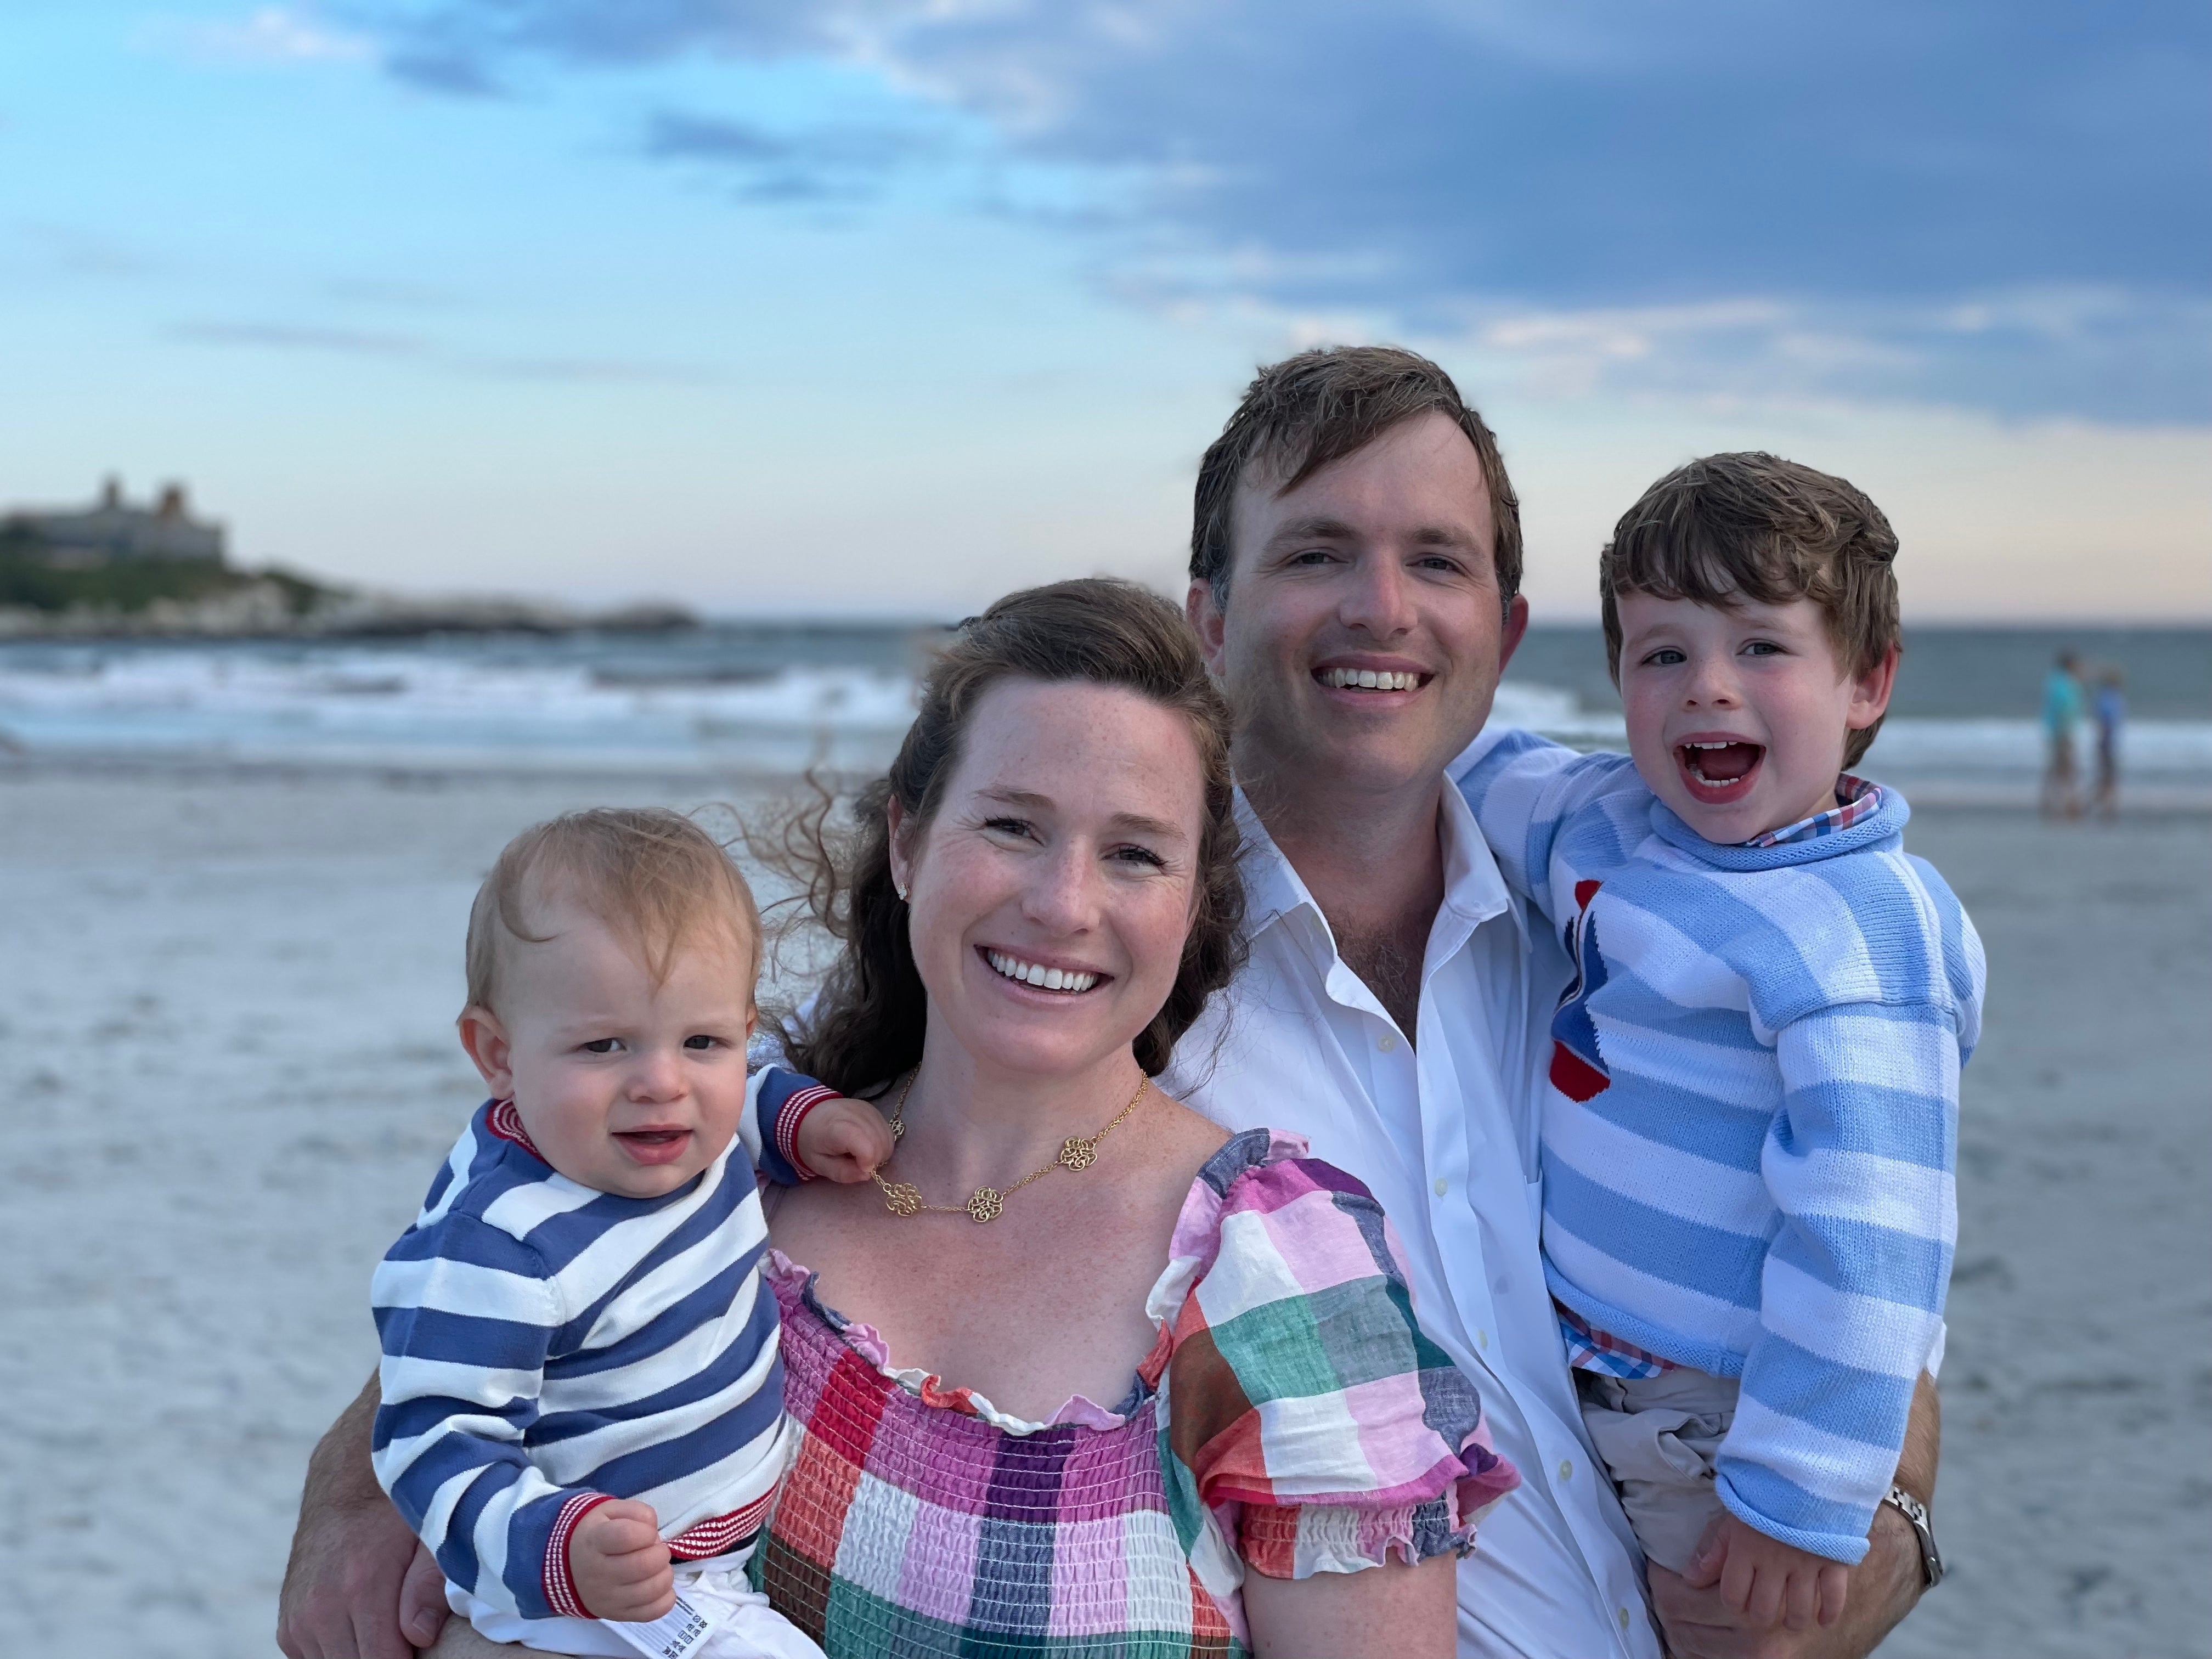 Christina Manice on a beach with her husband and two children.